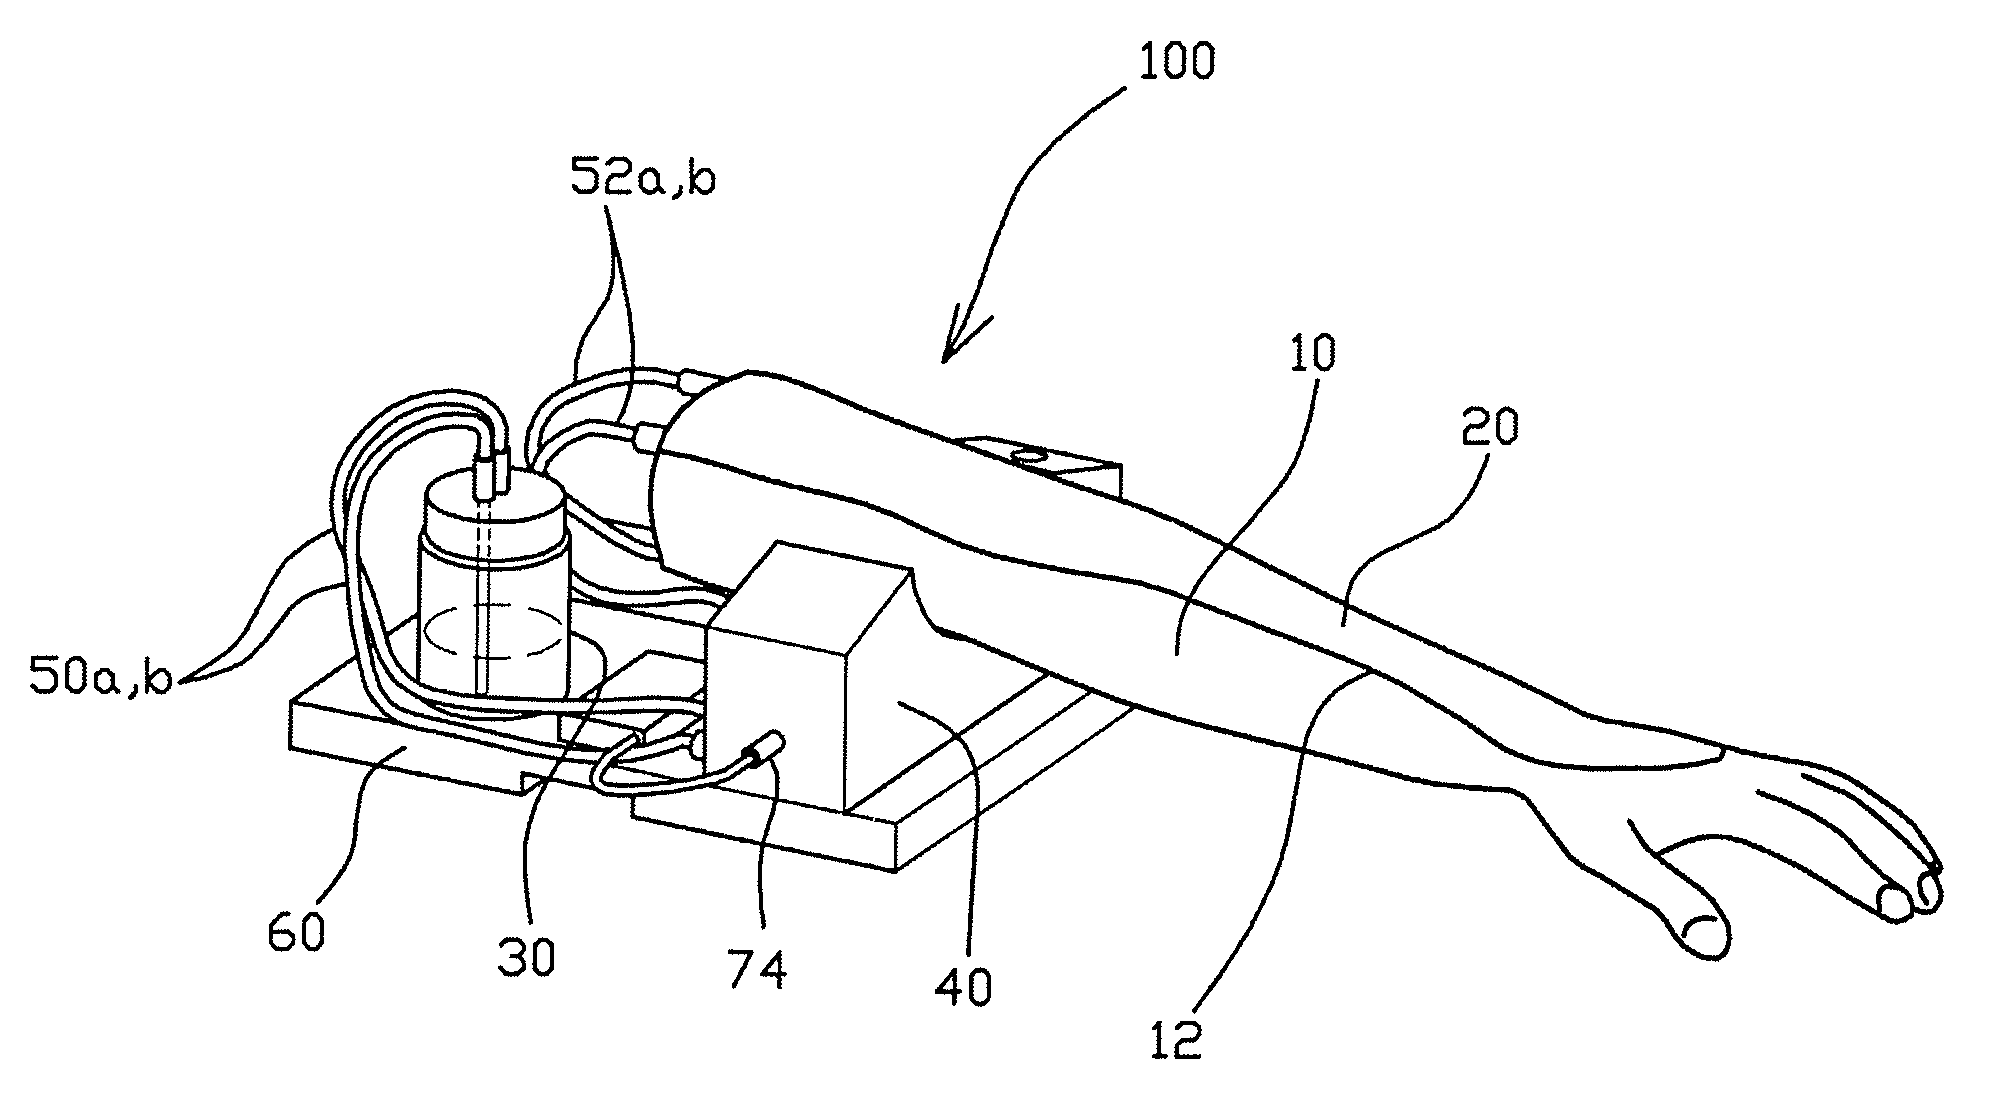 Arm model apparatus for intravenous injection training